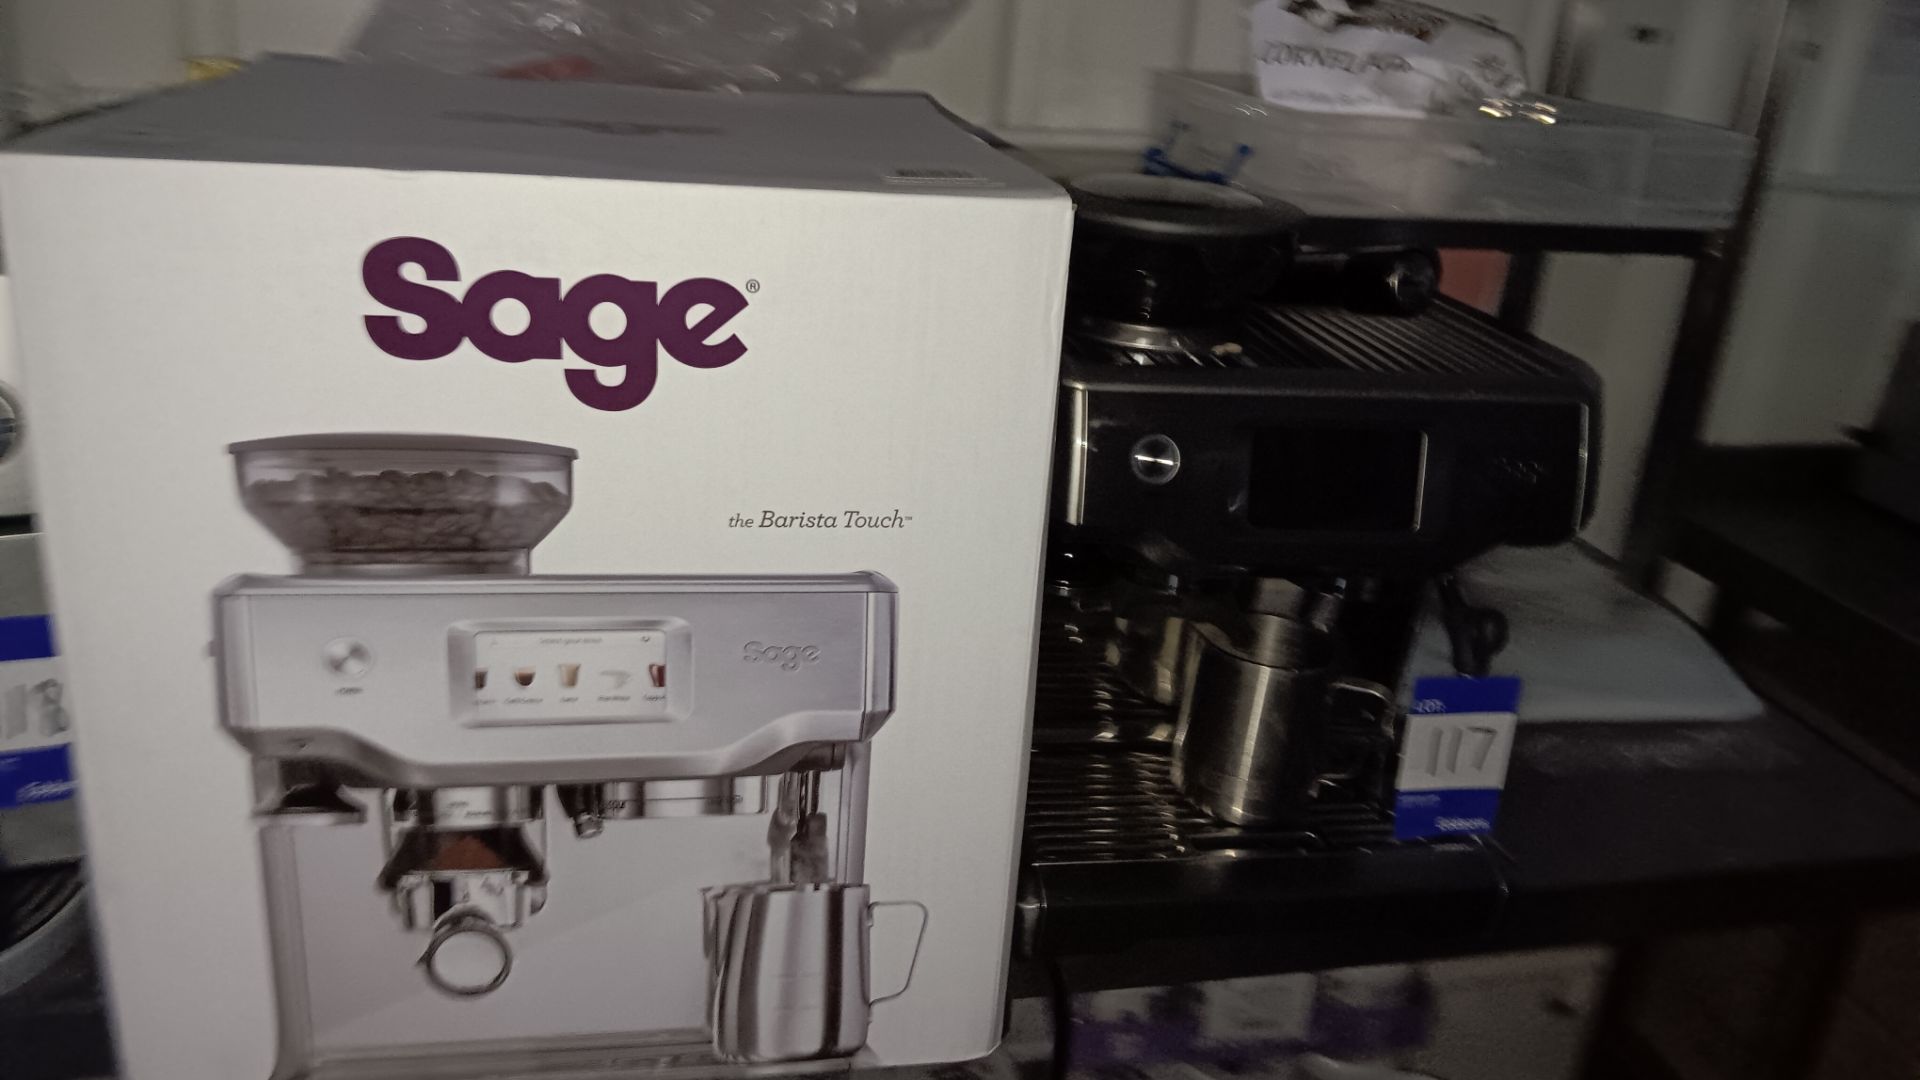 Sage SES880 BSS/C The Barista Touch Espresso Coffee Machine, Serial number A1SKAESA221303170 - Image 6 of 6